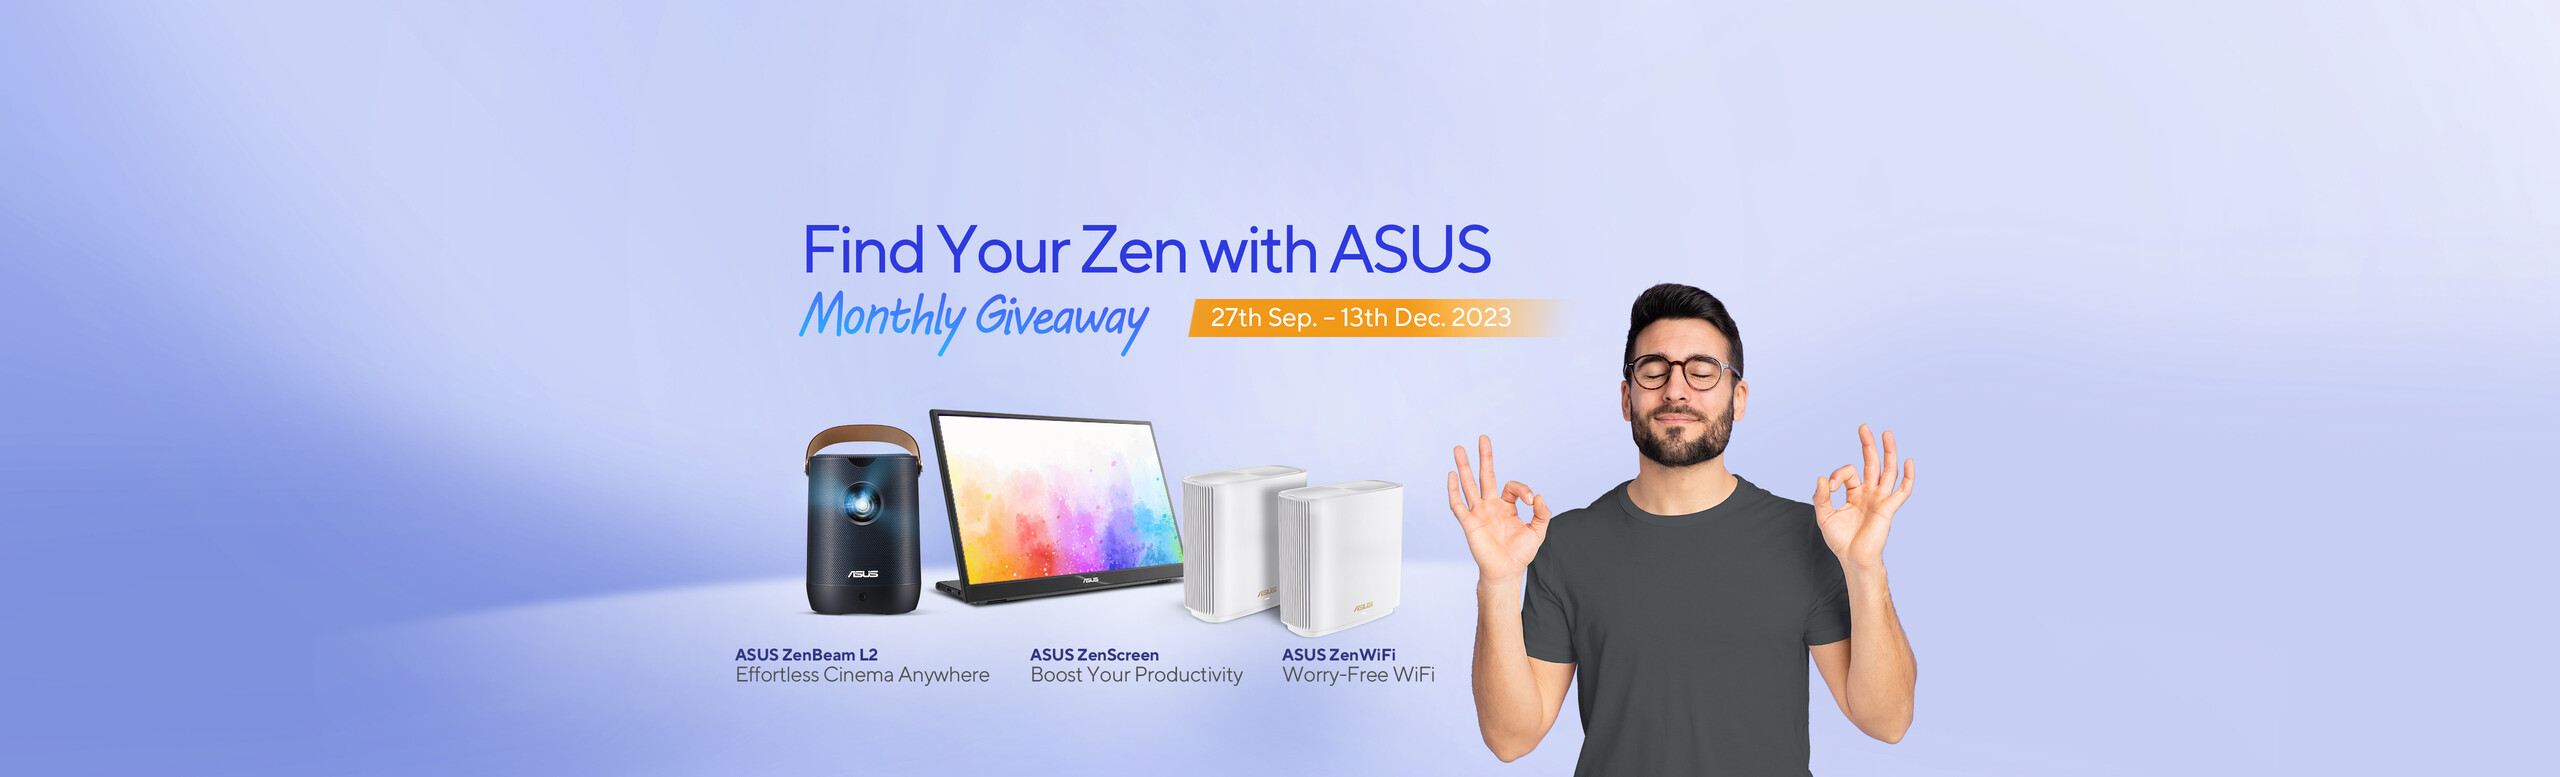 From left: ASUS ZenBeam L2 projector, ZenScreen, and ZenWiFi mesh system. Beside them, a man with eyes closed makes an "OK" gesture, reflecting the Zen spirit of the "Find Your Zen with ASUS" campaign.